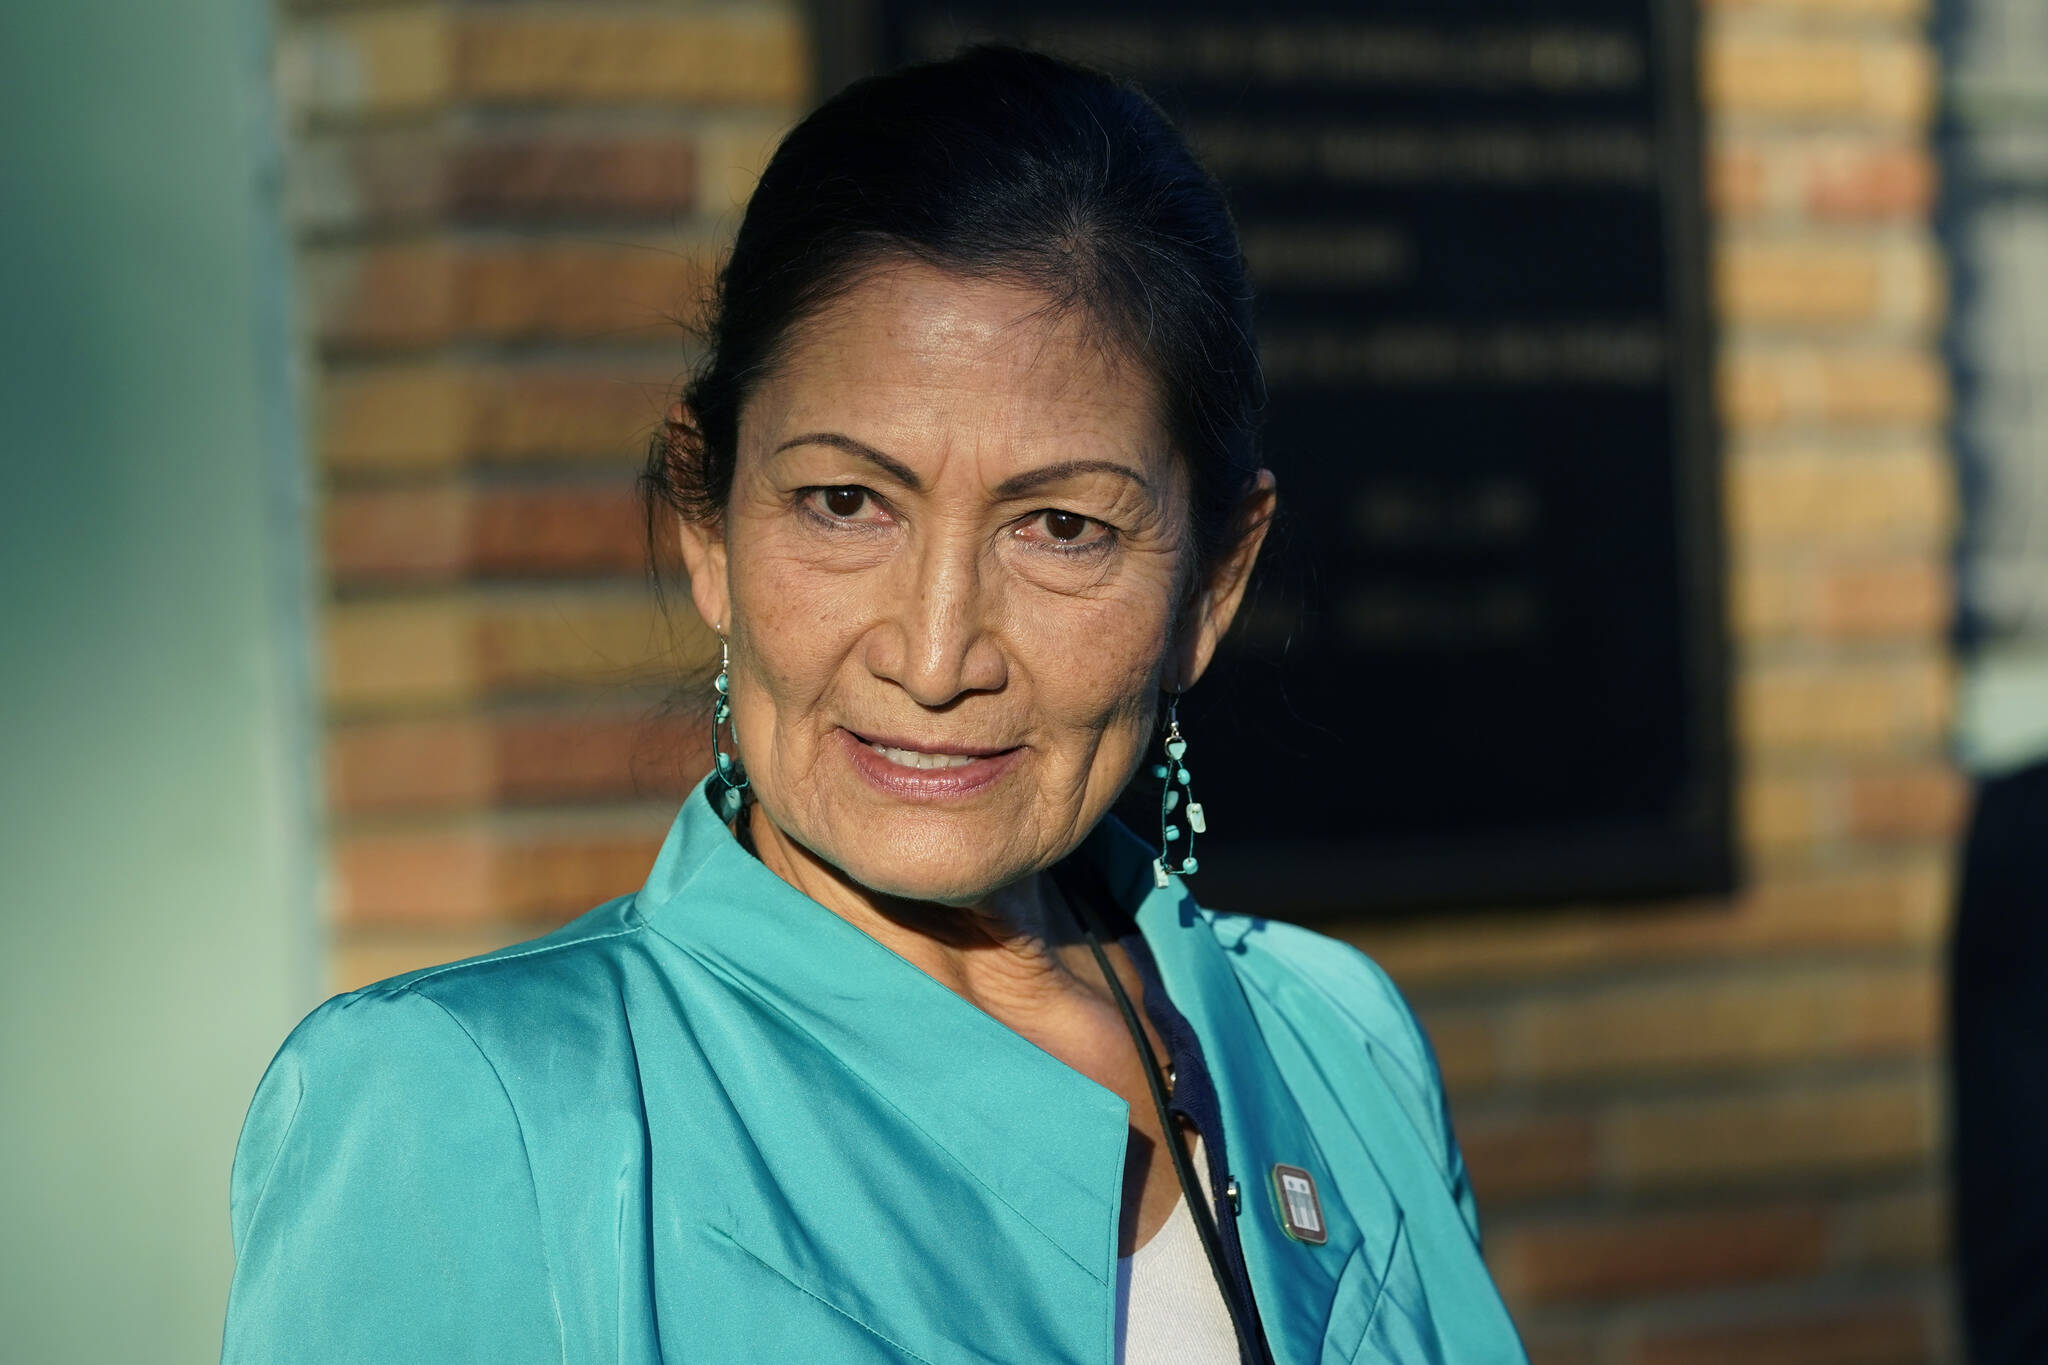 Secretary of the Interior Deb Haaland speaks with reporters while standing outside the Medgar and Myrlie Evers Home National Monument in Jackson, Miss., on Feb. 15, 2022. The Interior Department is on the verge of releasing a report on its investigation into the federal government’s past oversight of Native American boarding schools. Interior Secretary Deb Haaland said Wednesday, March 16, 2022, the report will come out next month. (AP Photo/Rogelio V. Solis, File)